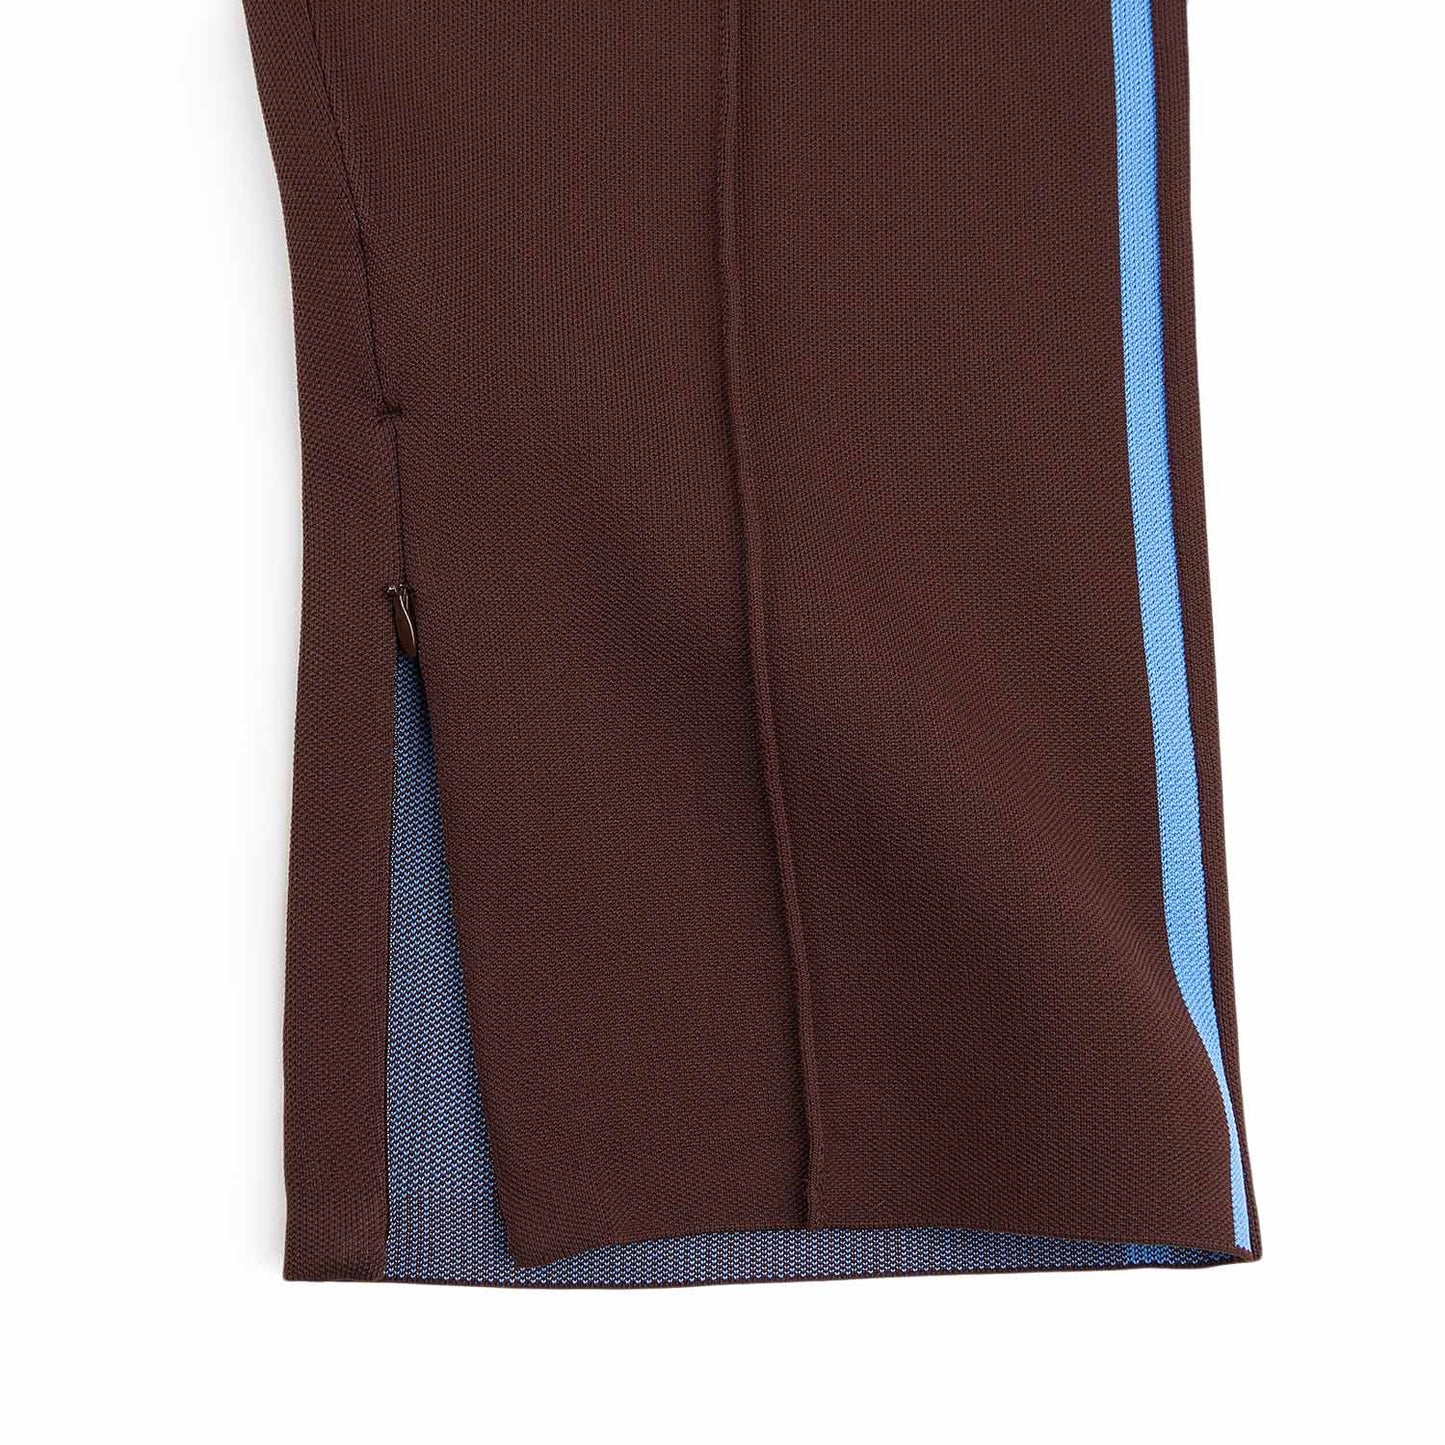 adidas x wales bonner trackpants (mystery brown)